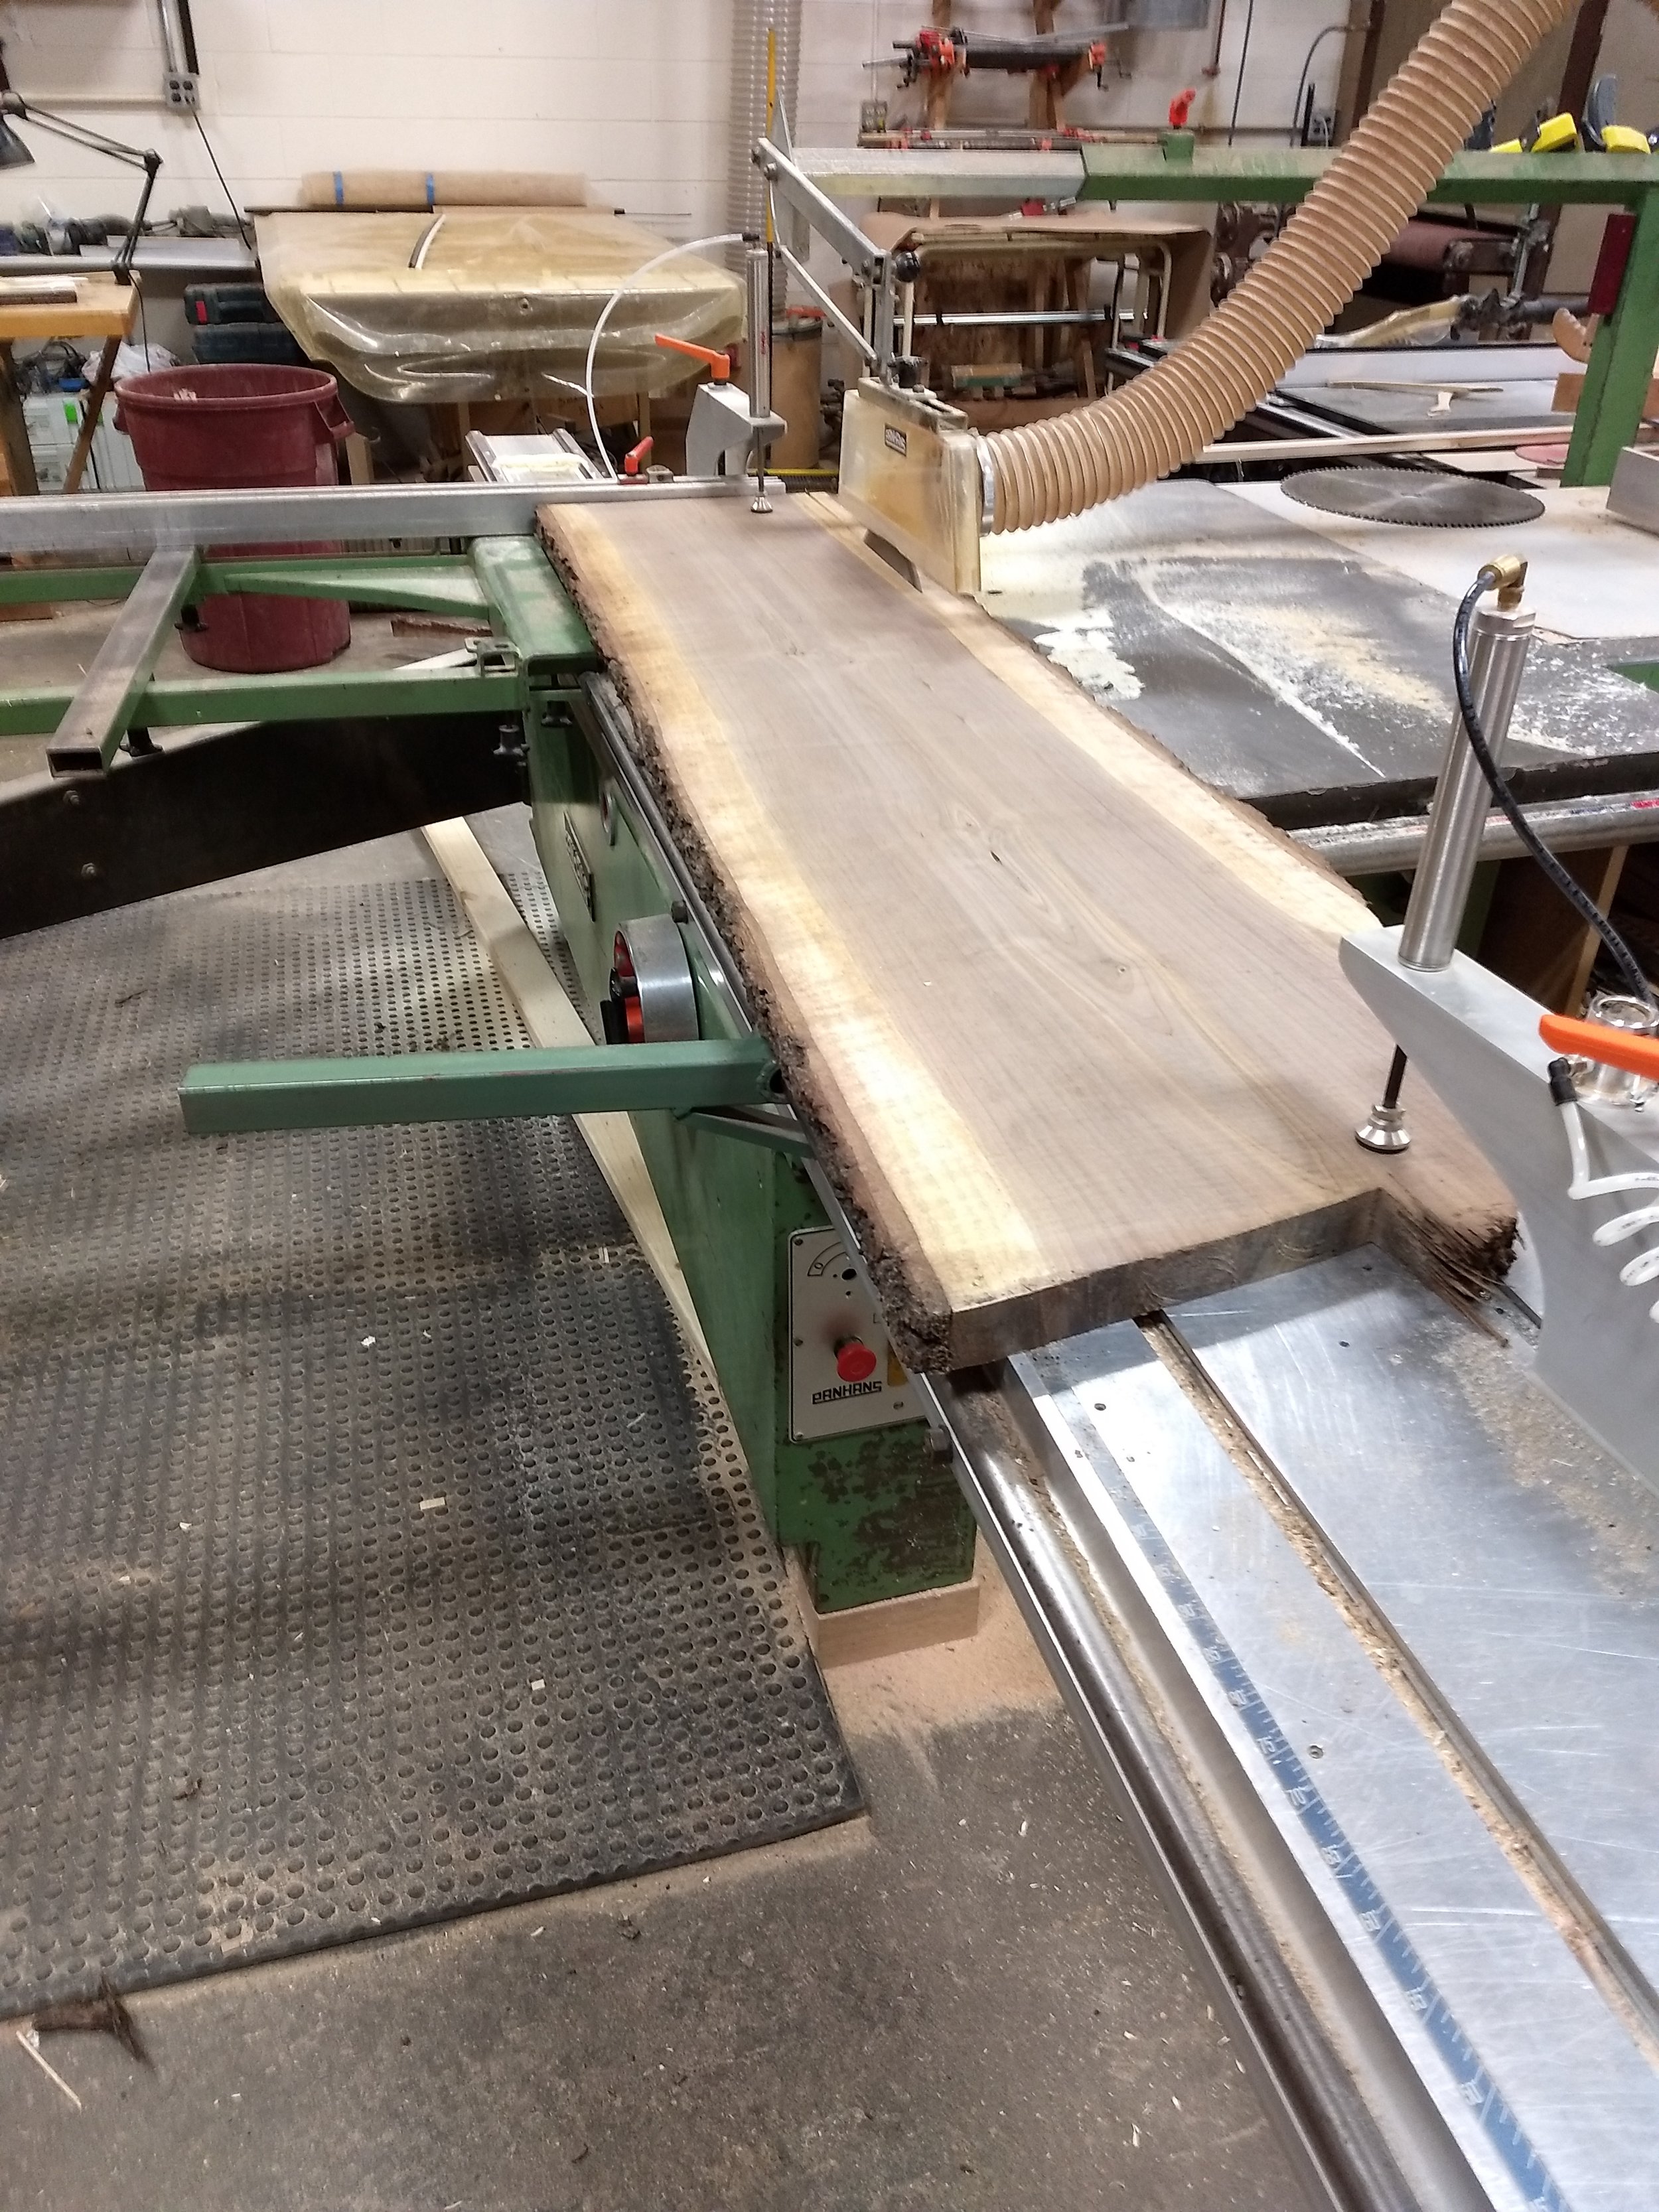 Trimming edges on the sliding table saw